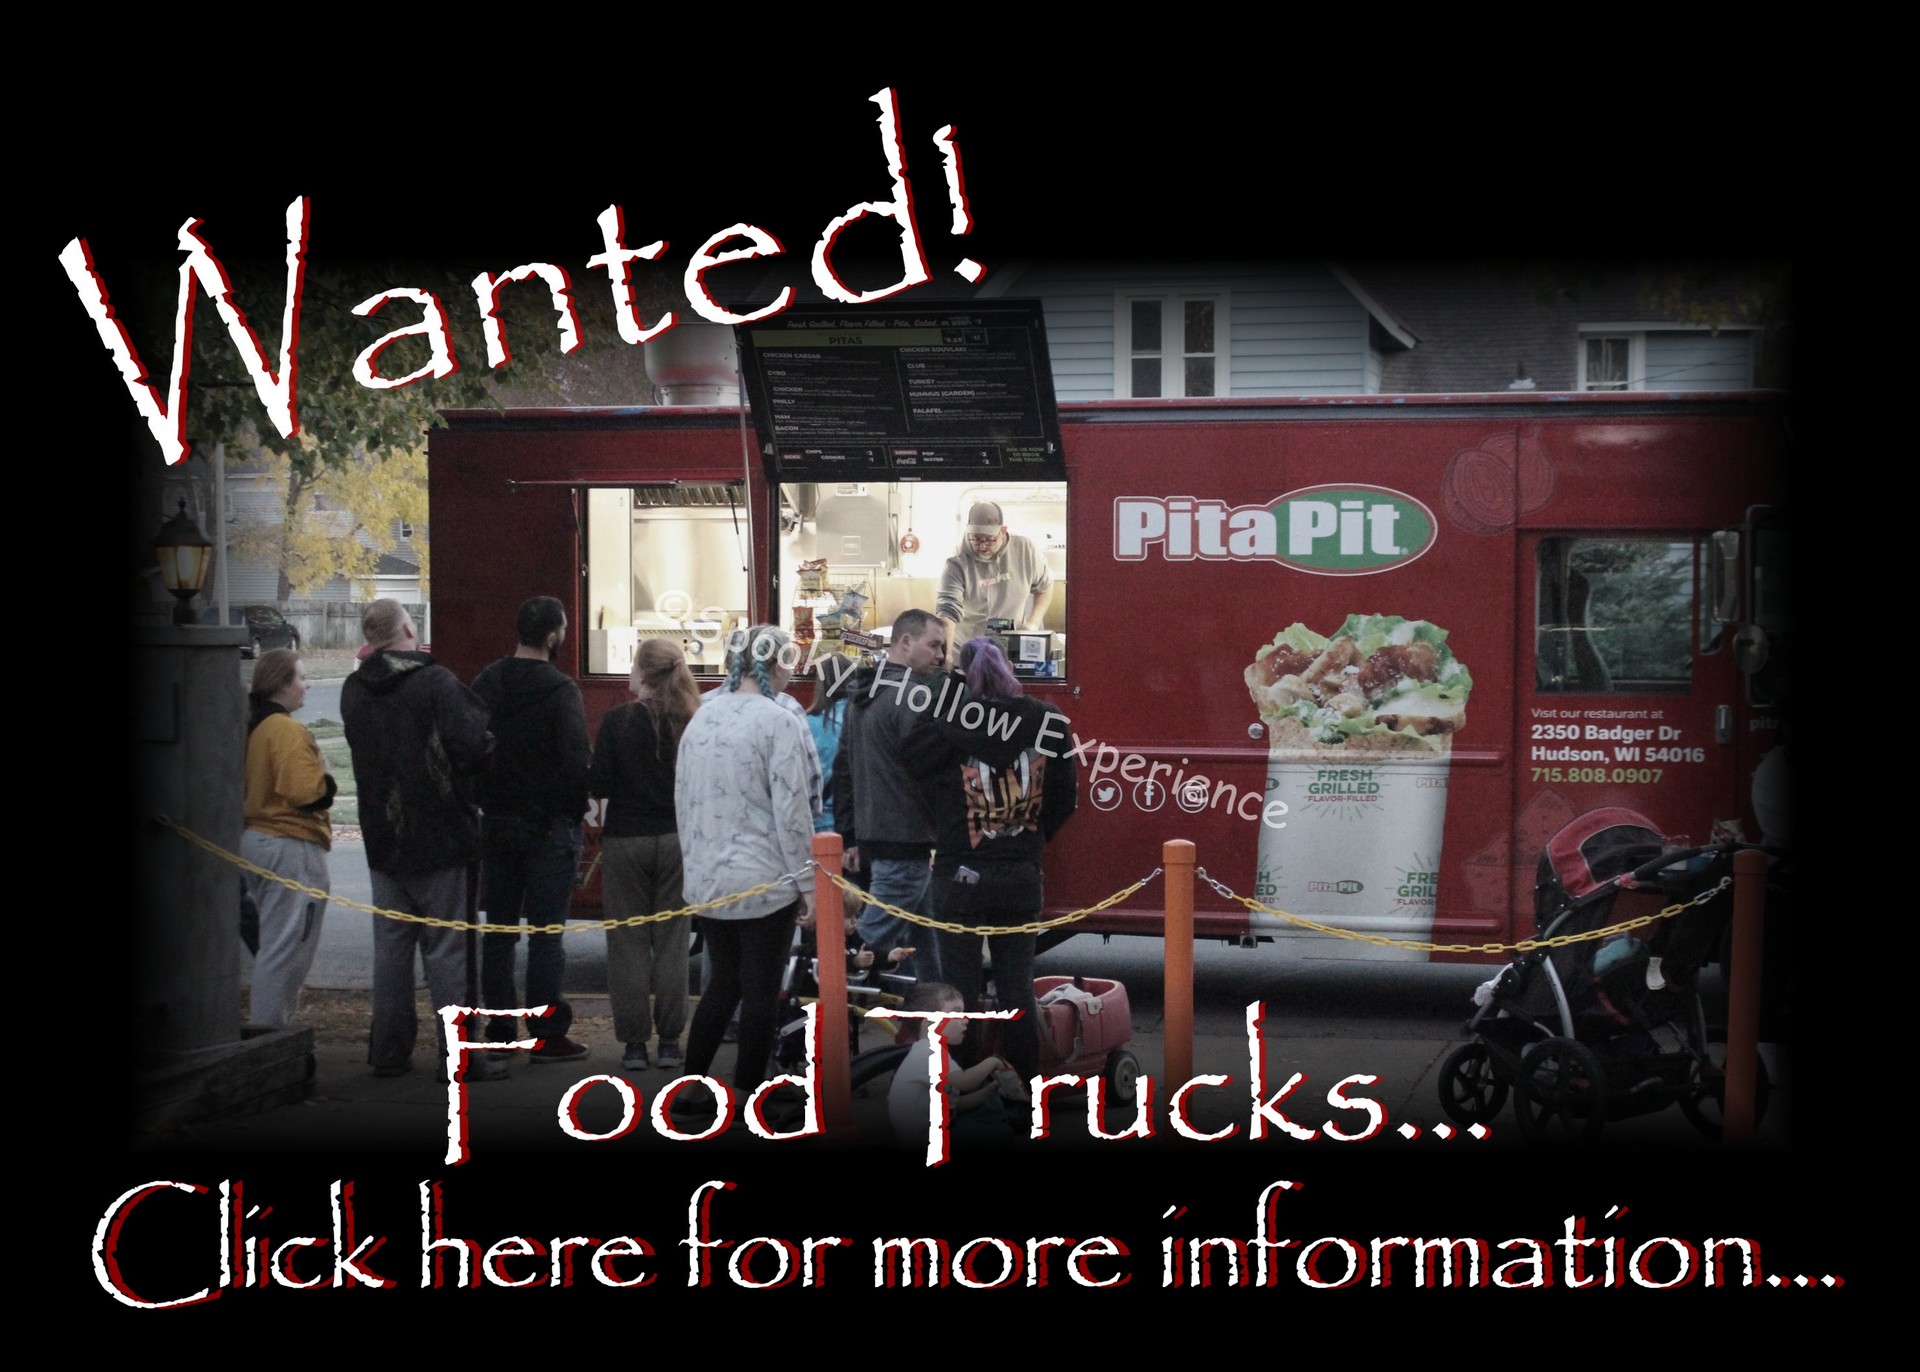 Spooky Hollow Experience copyright food truck